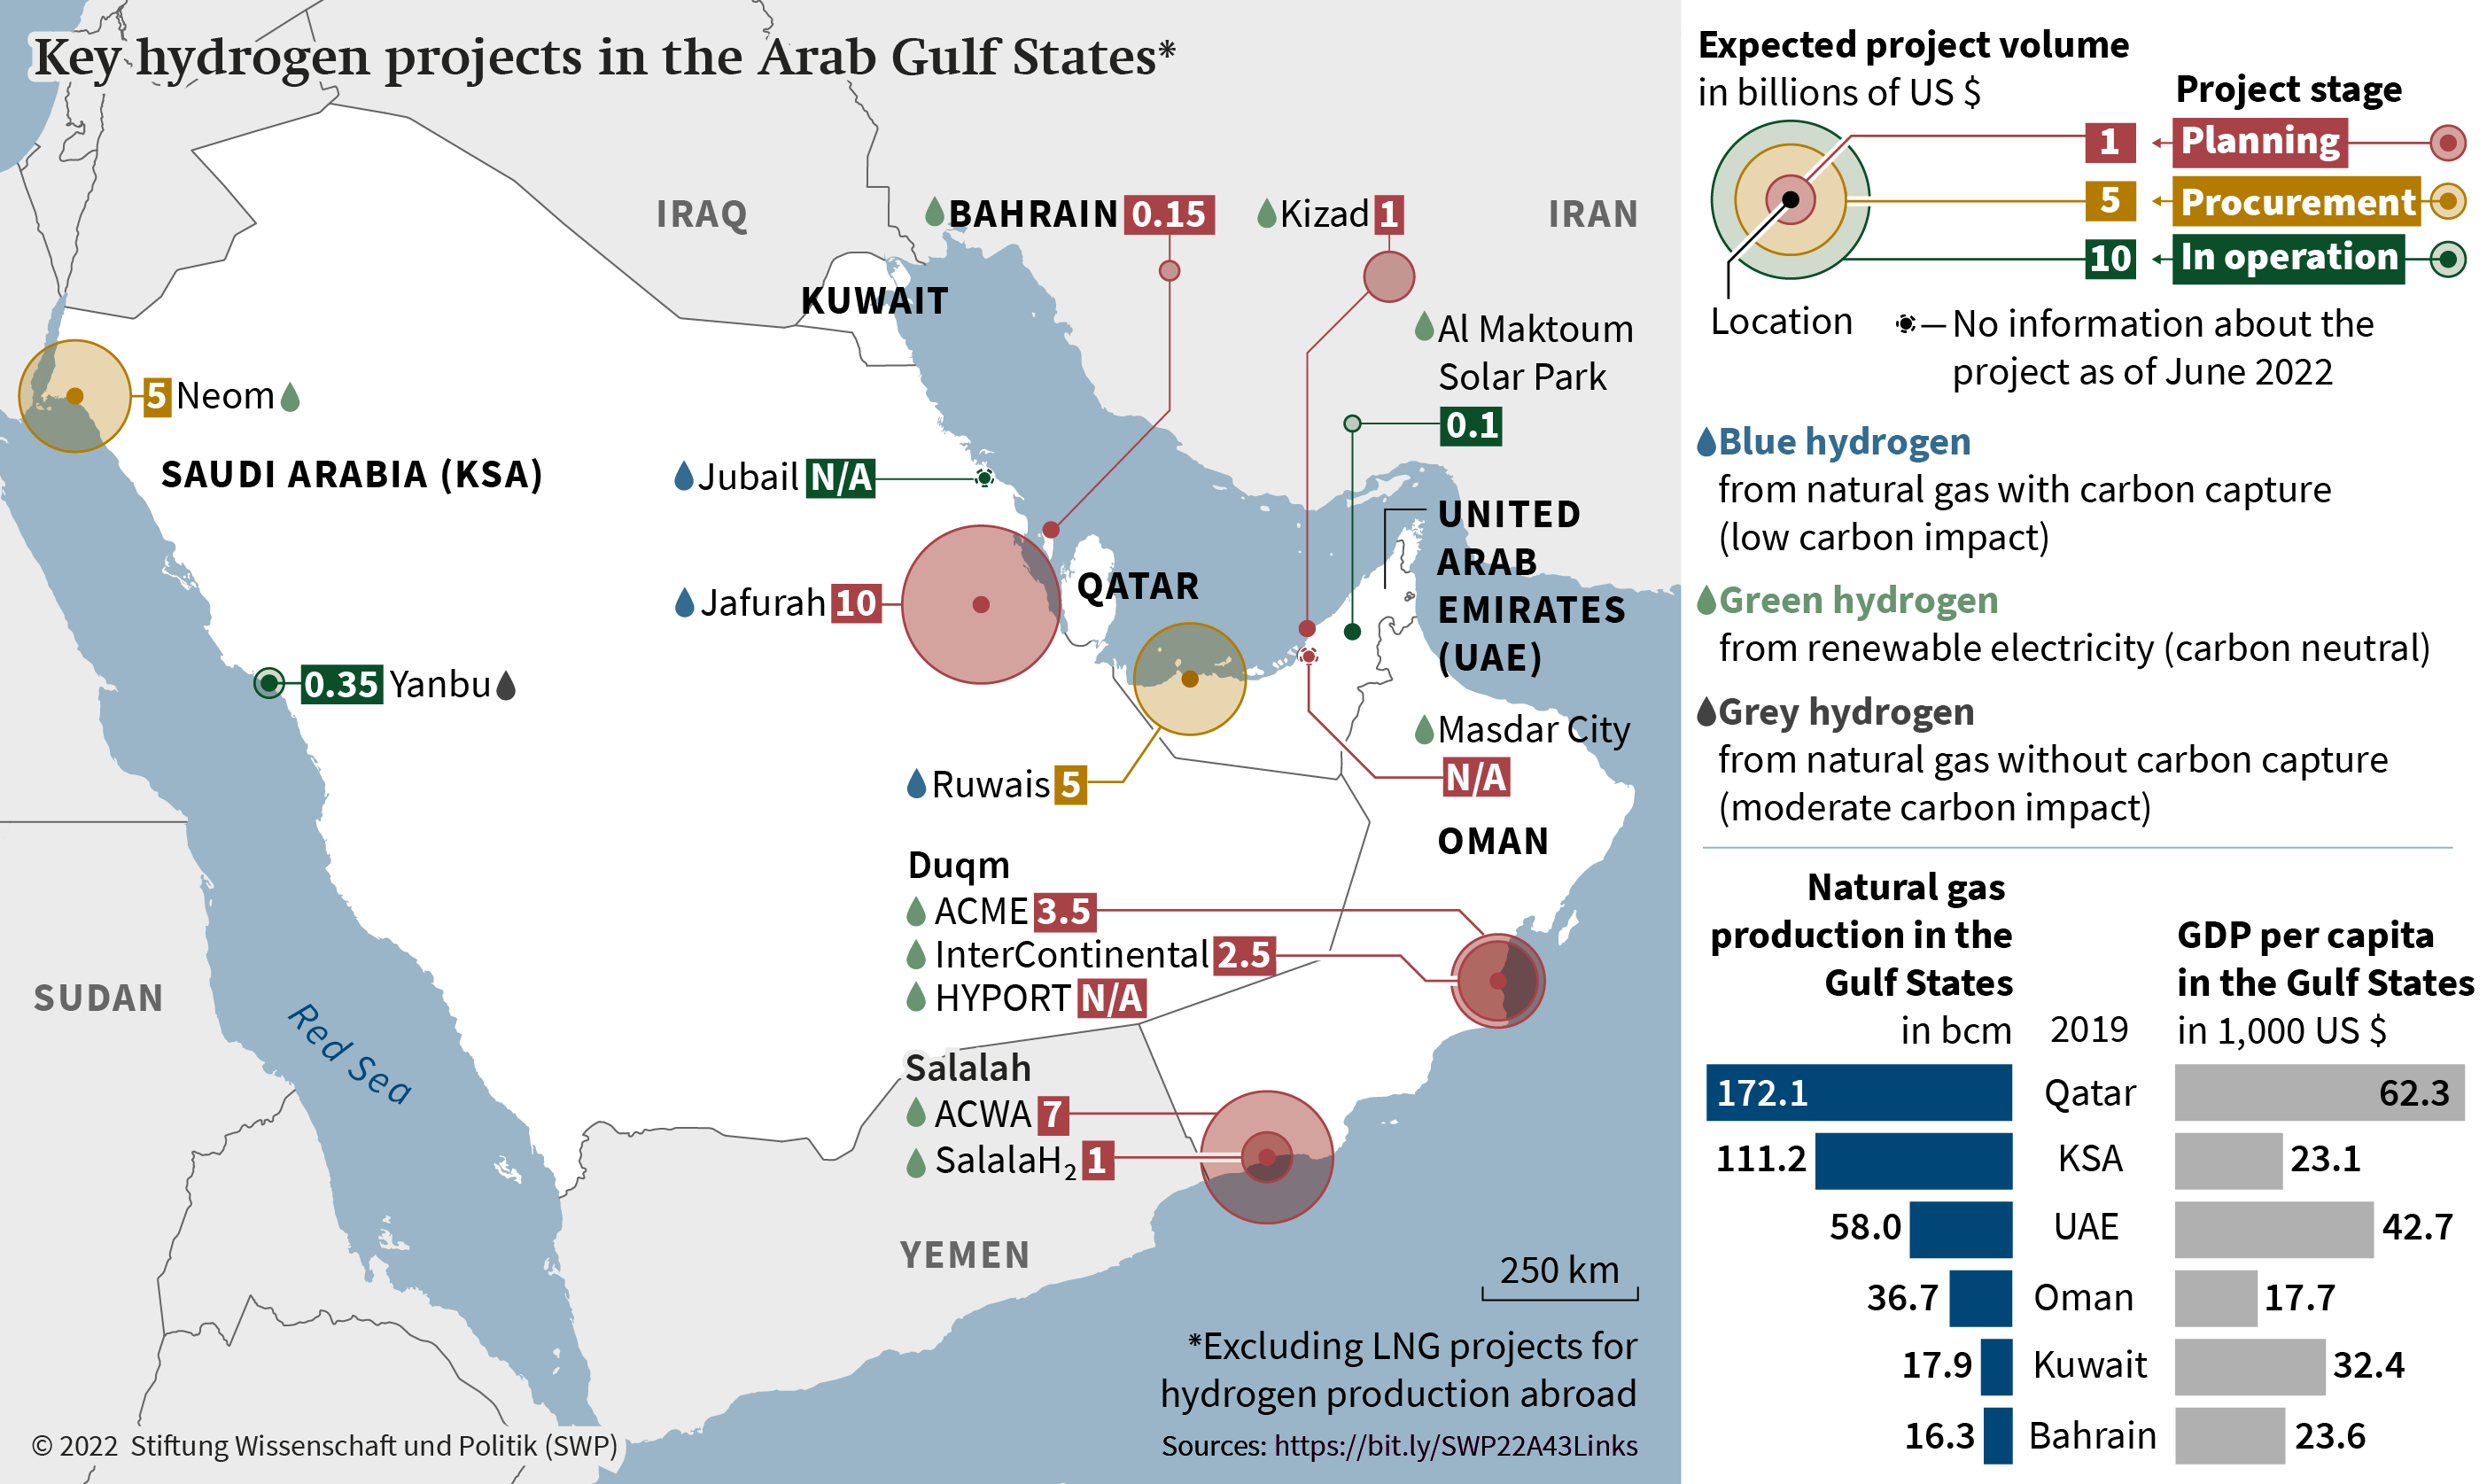 Figure: Key hydrogen projects in the Arab Gulf States